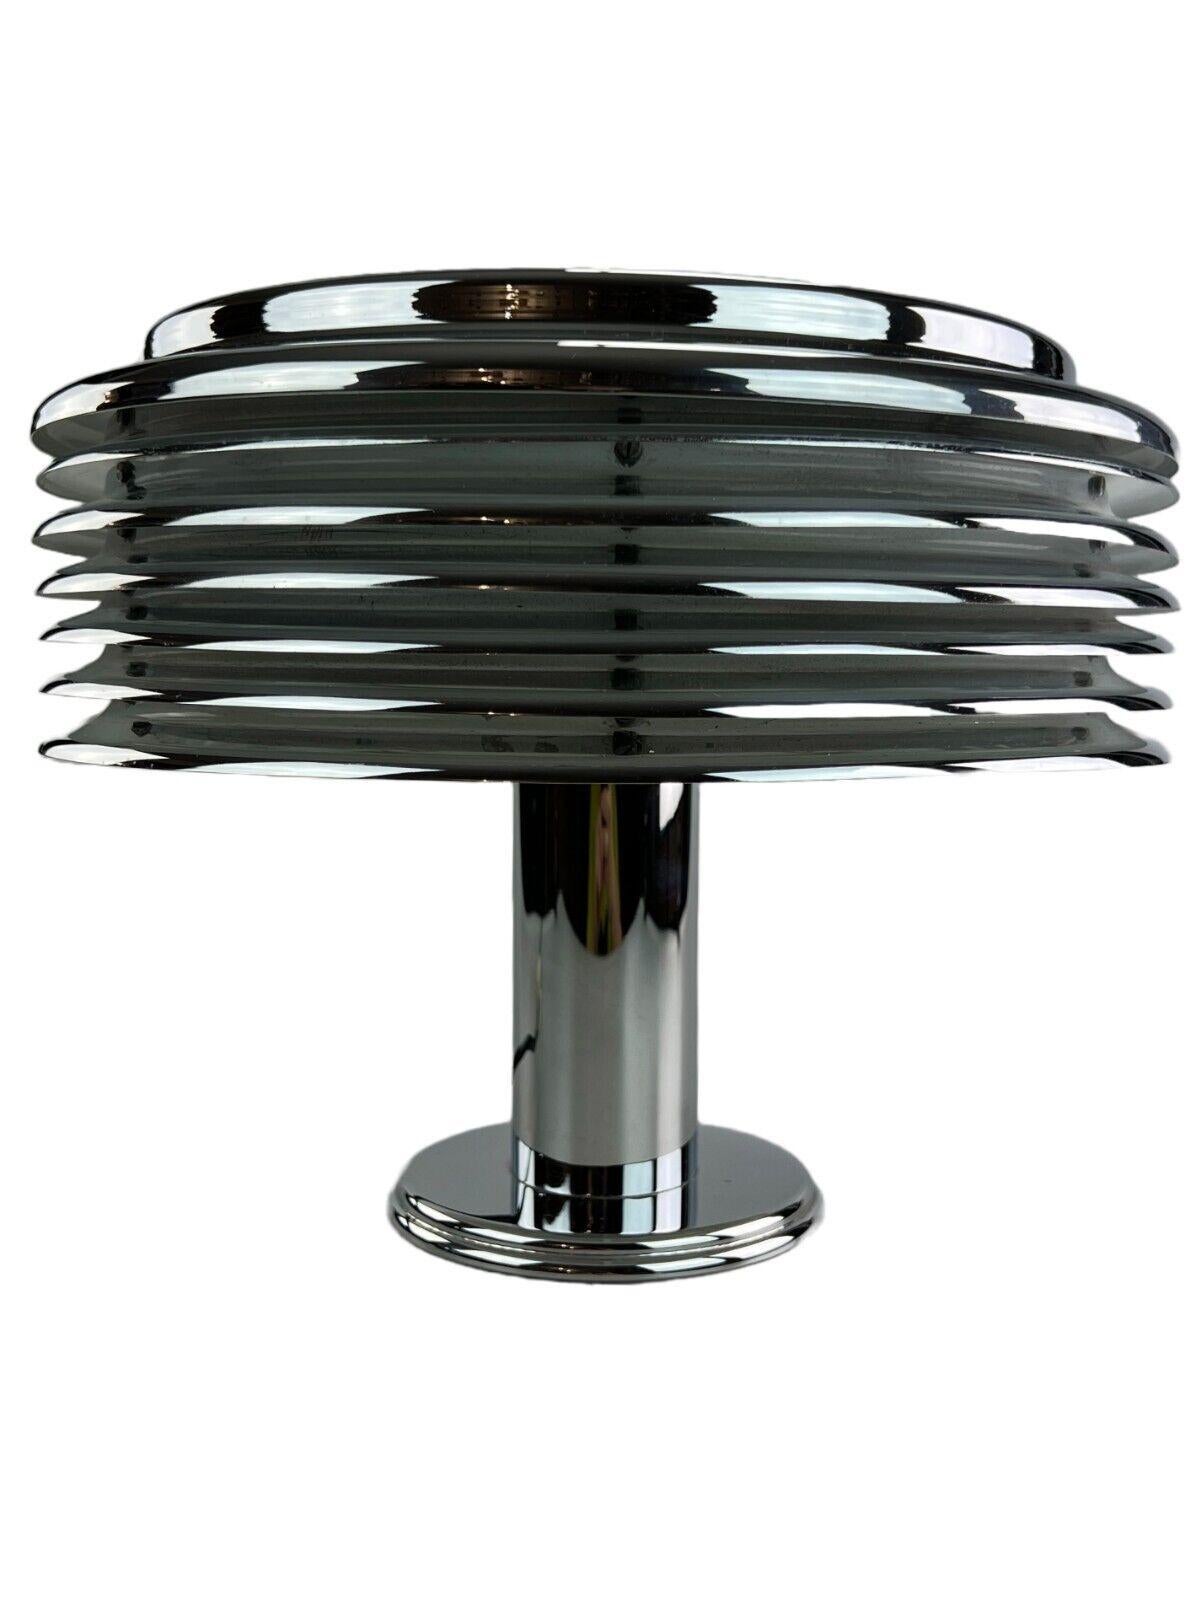 60s 70s table lamp Staff lights Kazuo Motozawa Saturno chrome design

Object: table lamp

Manufacturer: Staff lights

Condition: good

Age: around 1960-1970

Dimensions:

Diameter = 34cm
Height = 27cm

Other notes:

E27